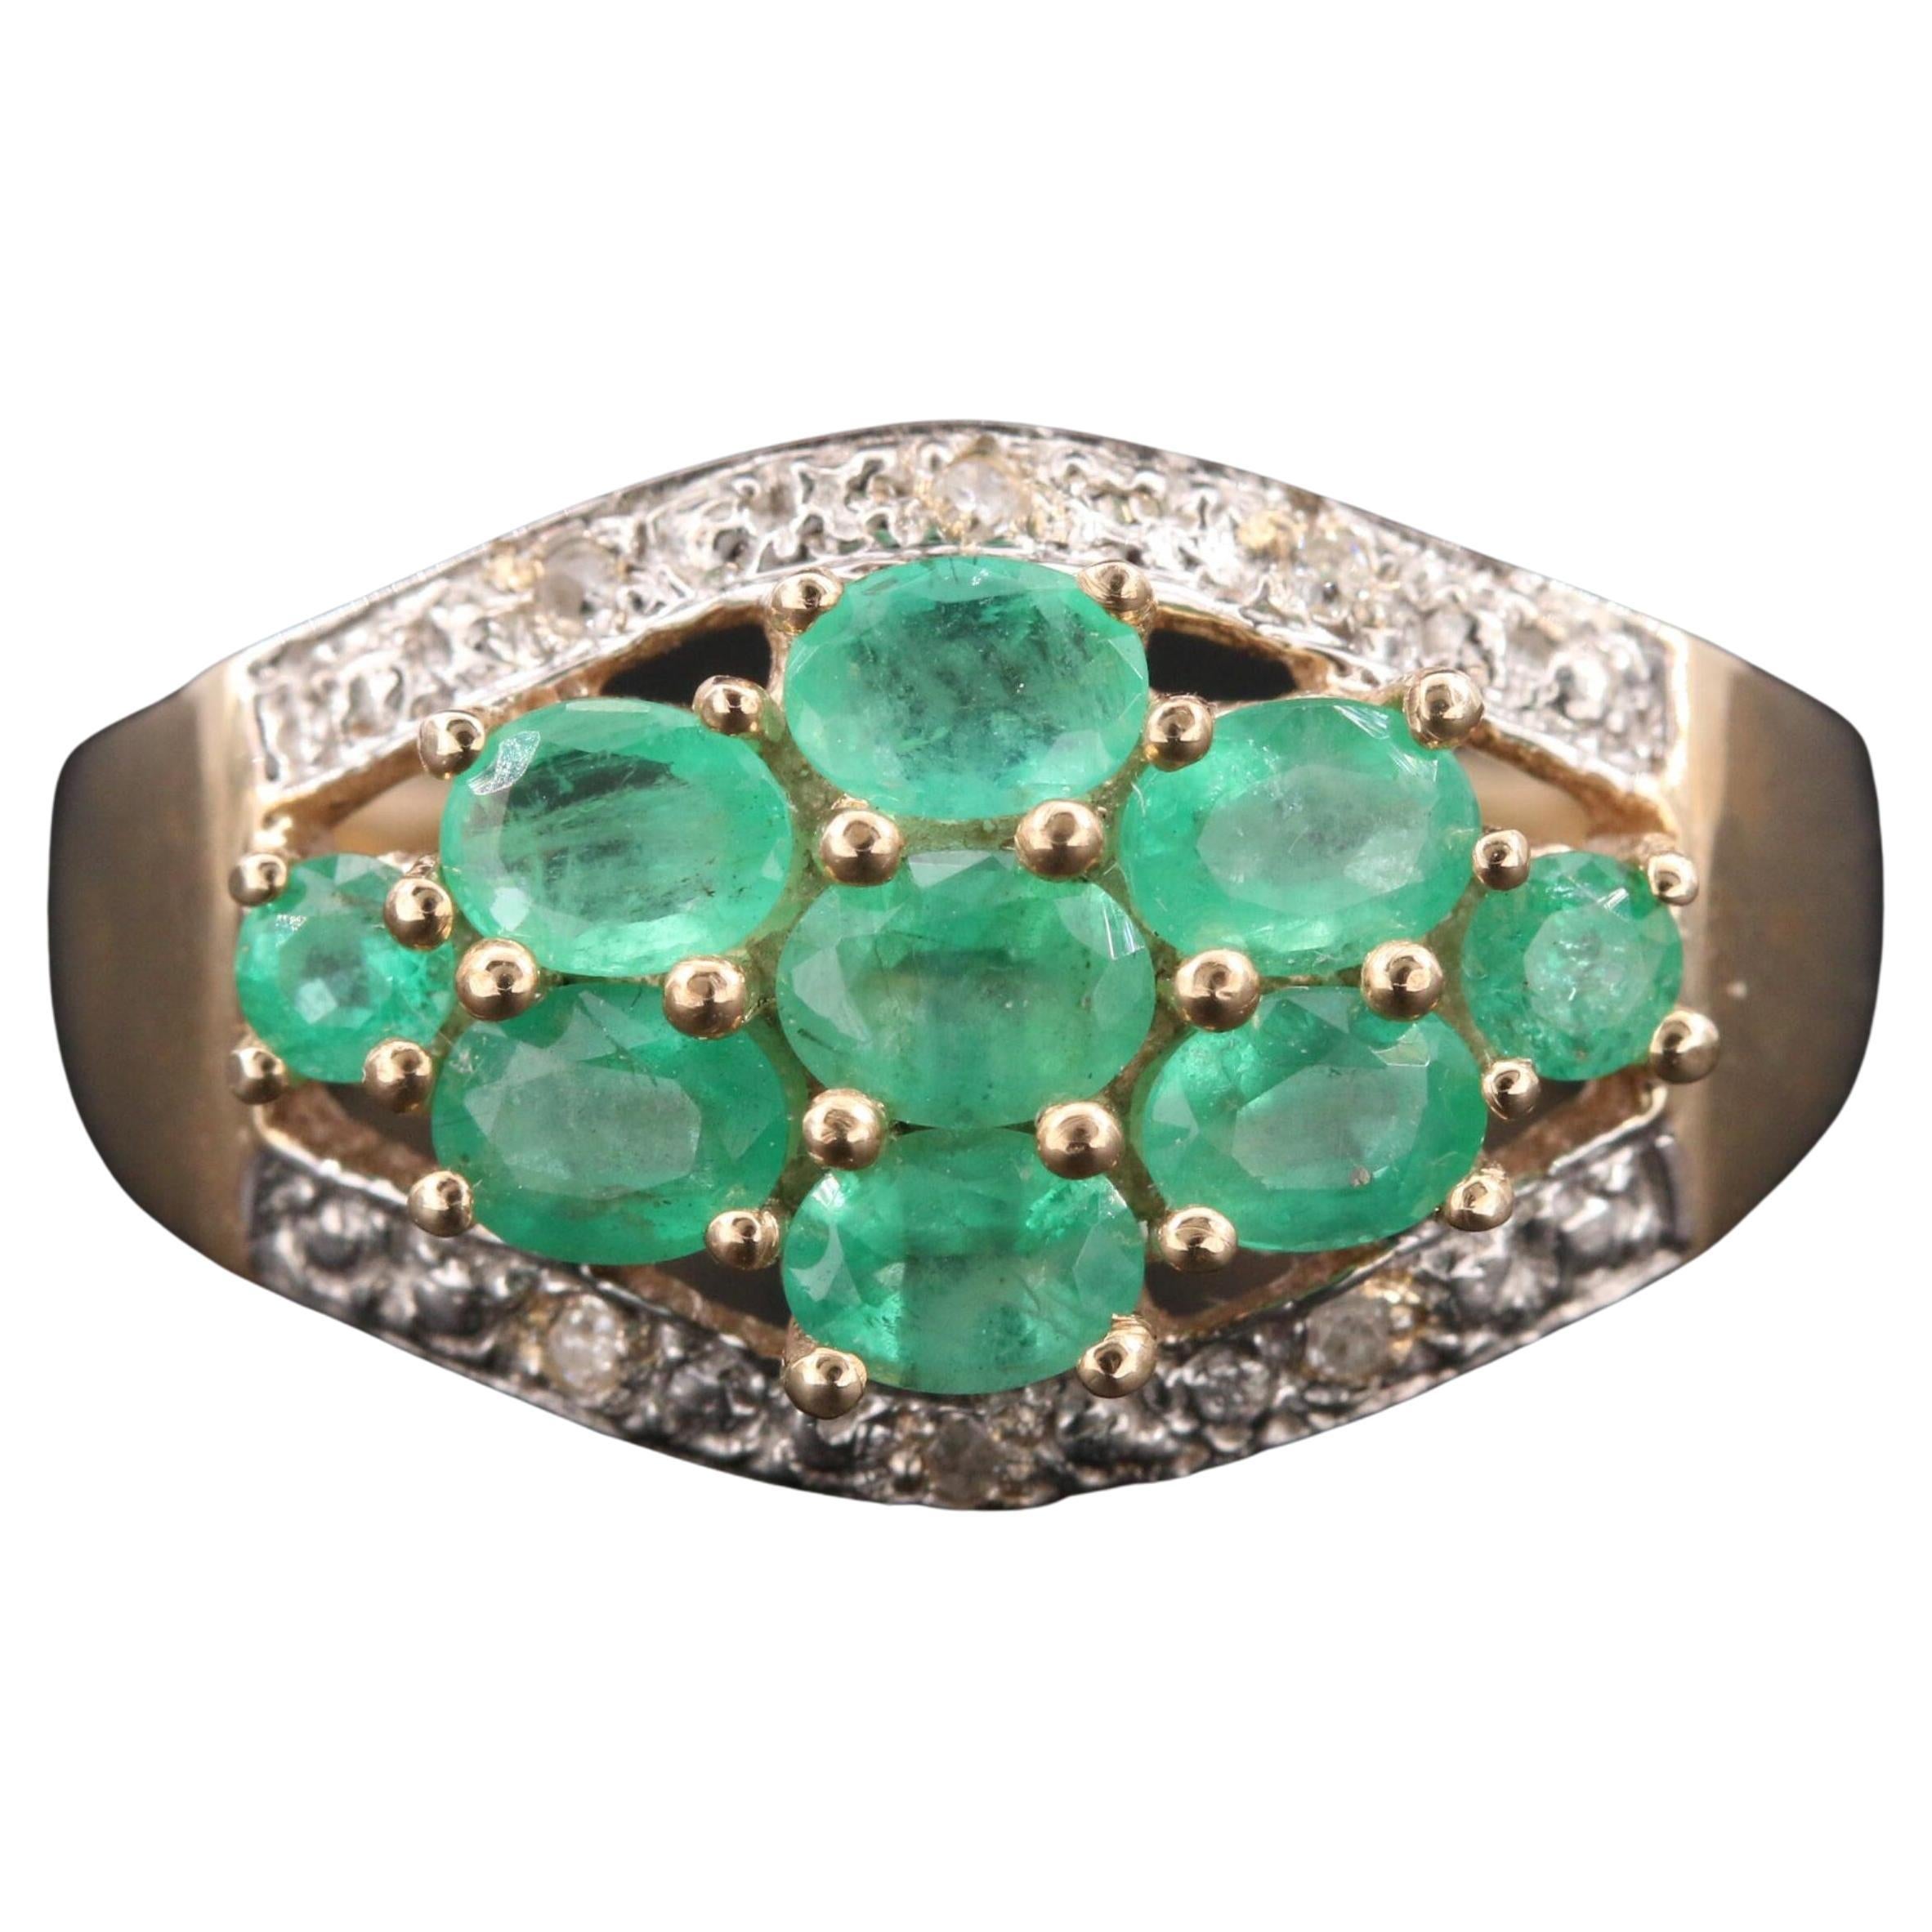 For Sale:  Halo Emerald Engagement Ring, Antique Emerald Wedding Ring